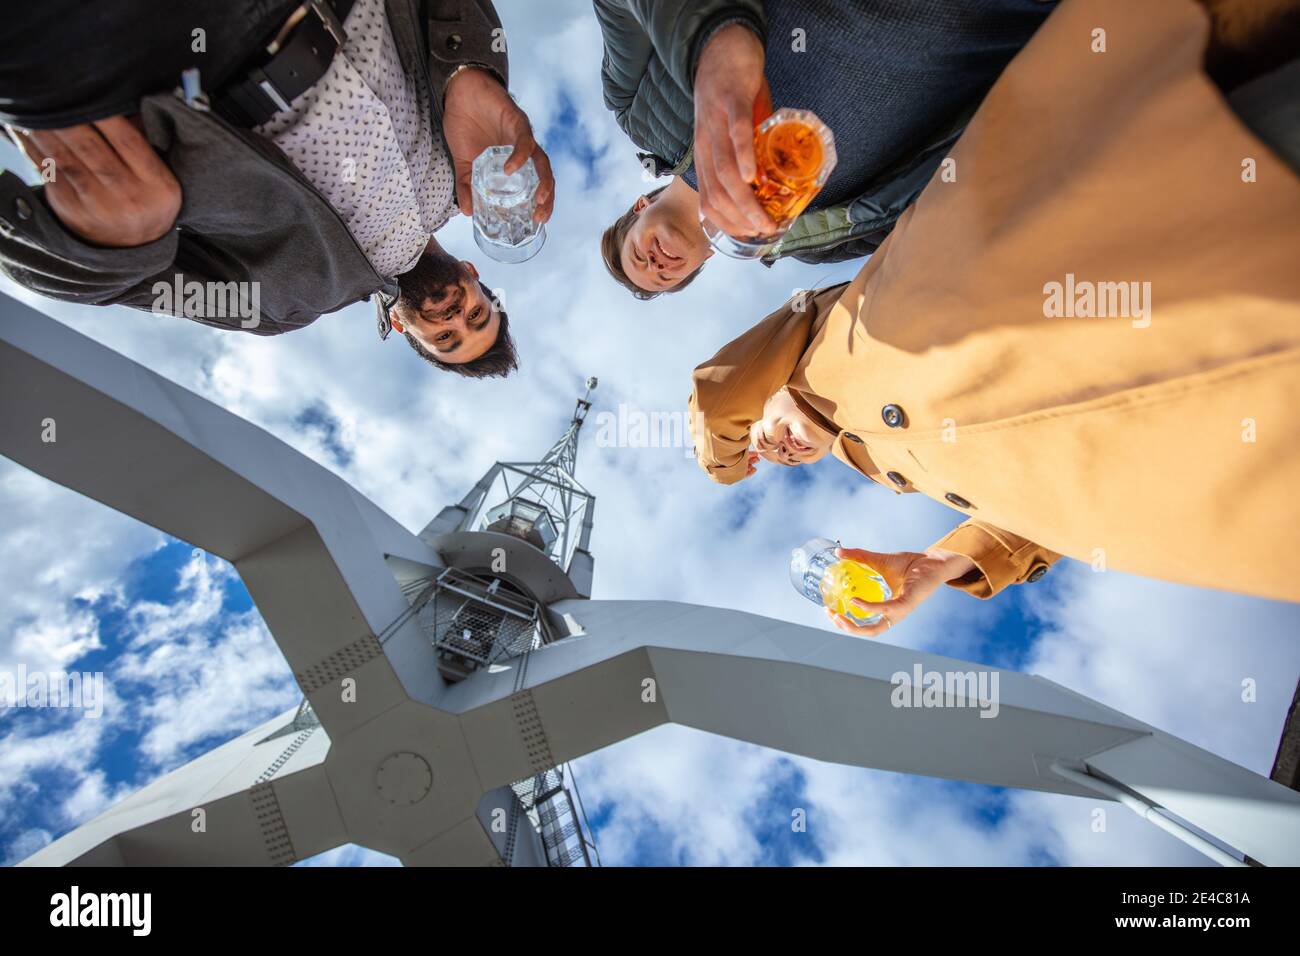 Young people, leisure time in the city. Three people stand at the harbor together with a drink in hand. View of the group from a frog's perspective Stock Photo